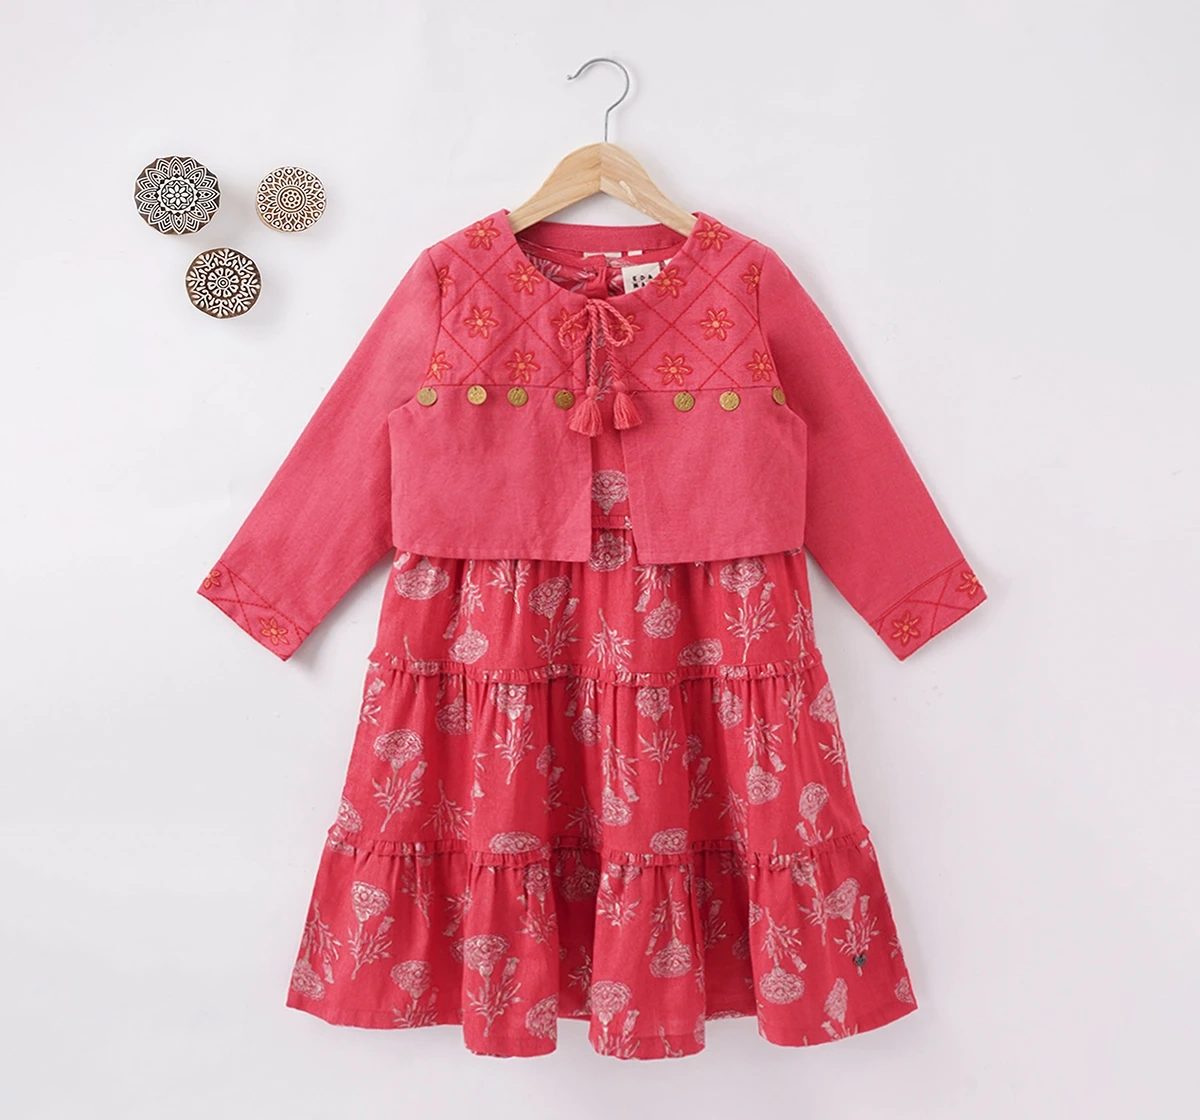 Girls Formal Wedding Set Blazer Dress Jackets For Women And Dress For  School, Weddings, And Special Occasions Sizes 4 14 Years From Deng08,  $19.76 | DHgate.Com